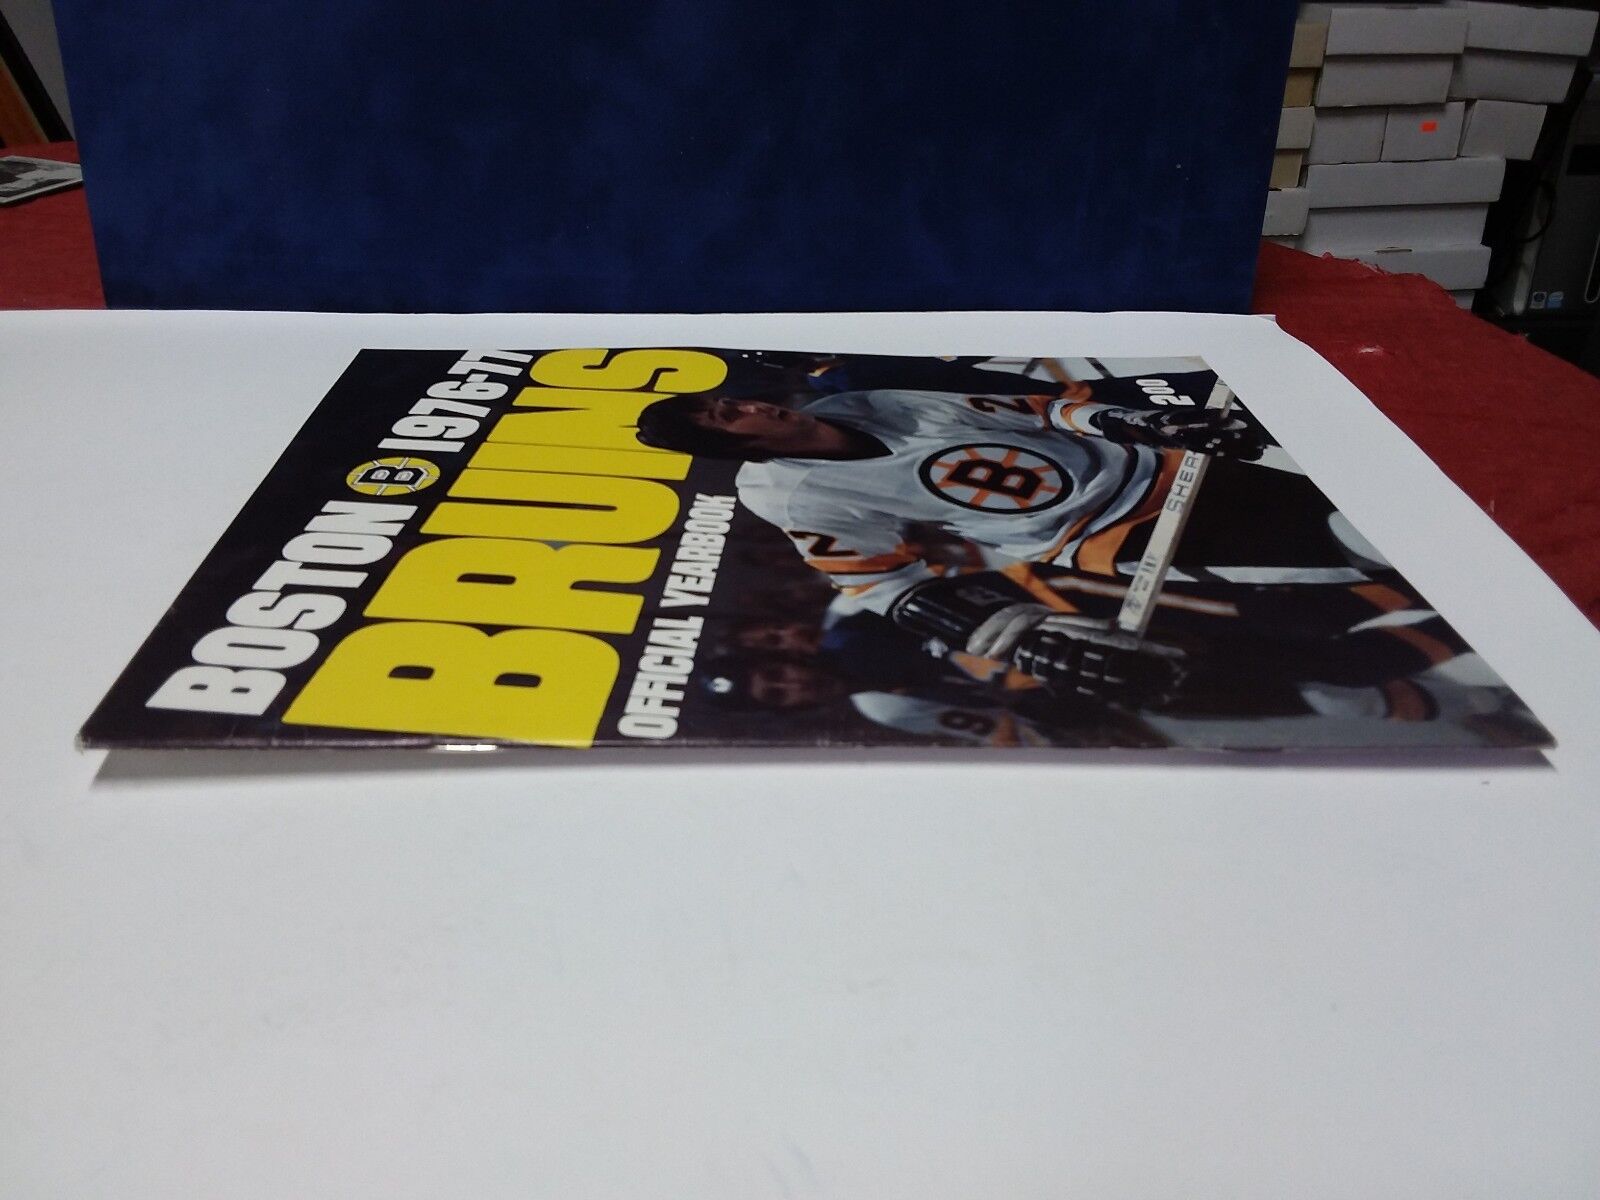 Boston Bruins, 1976 - 77 Yearbook, Brad Park on Cover, Excellent condition